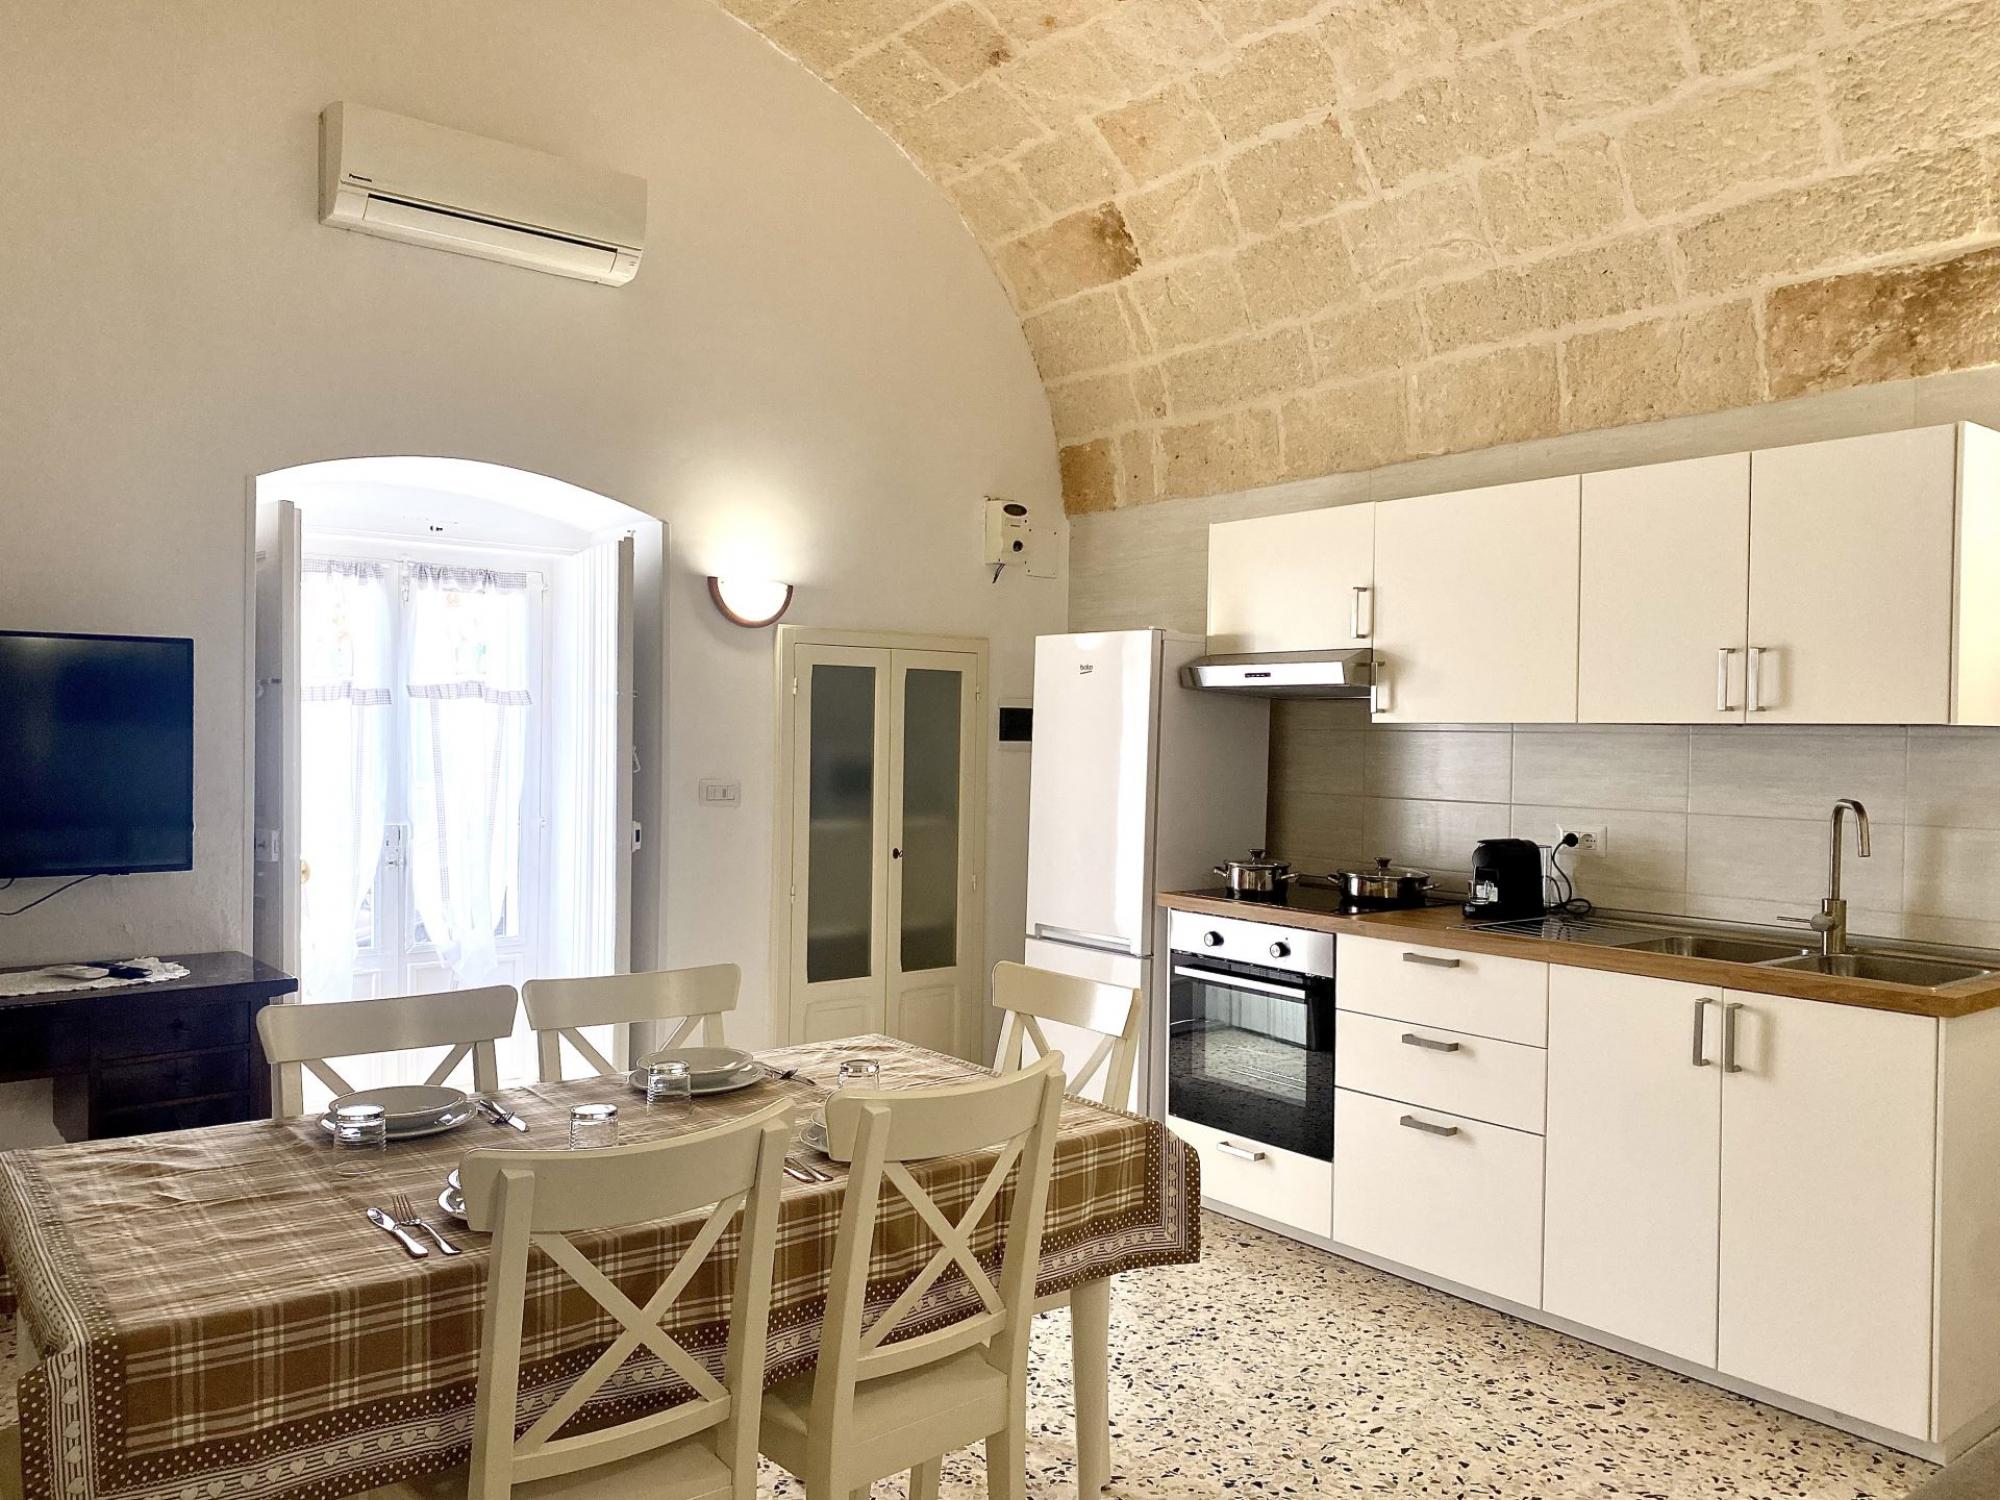 Property Image 1 - 4 people  2 bathrooms  suitable for families  great location-Dimora Anna